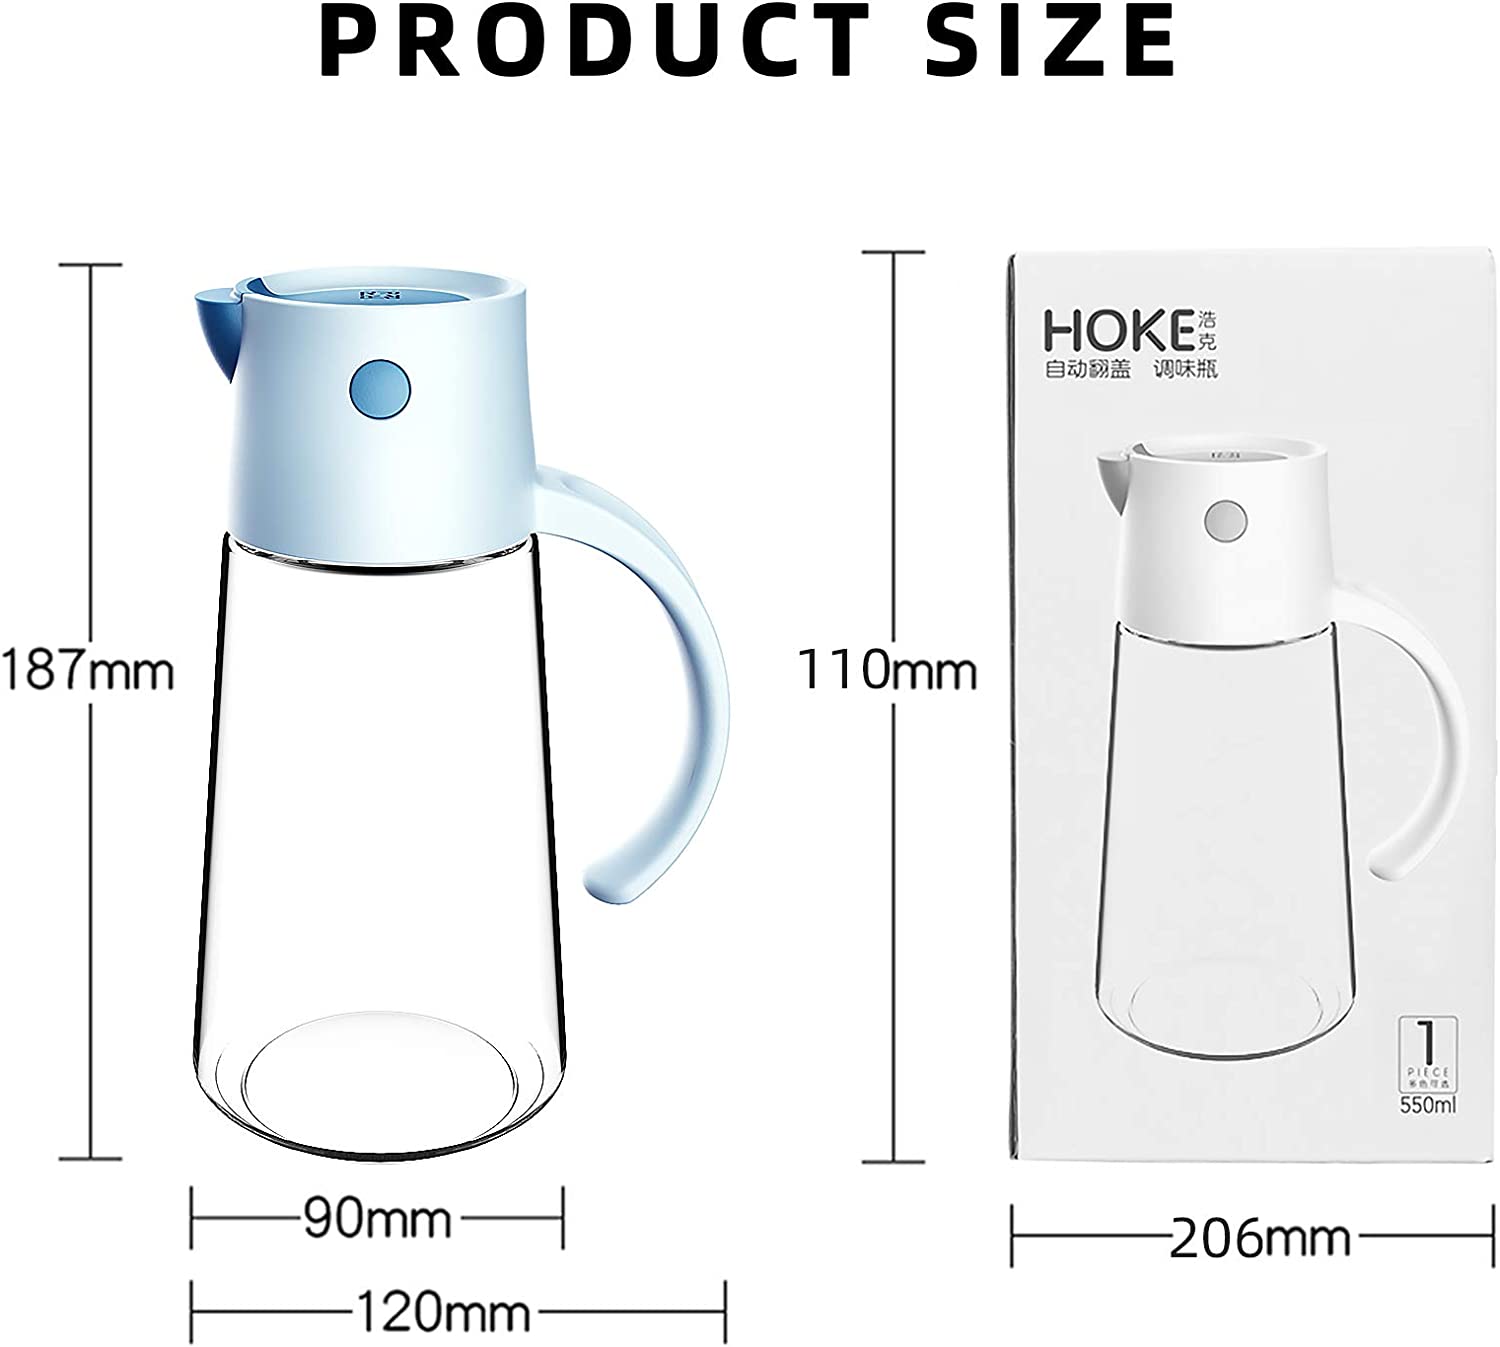 650ml Capacity Kitchen Automatic Oil Dispenser Bottle with its size